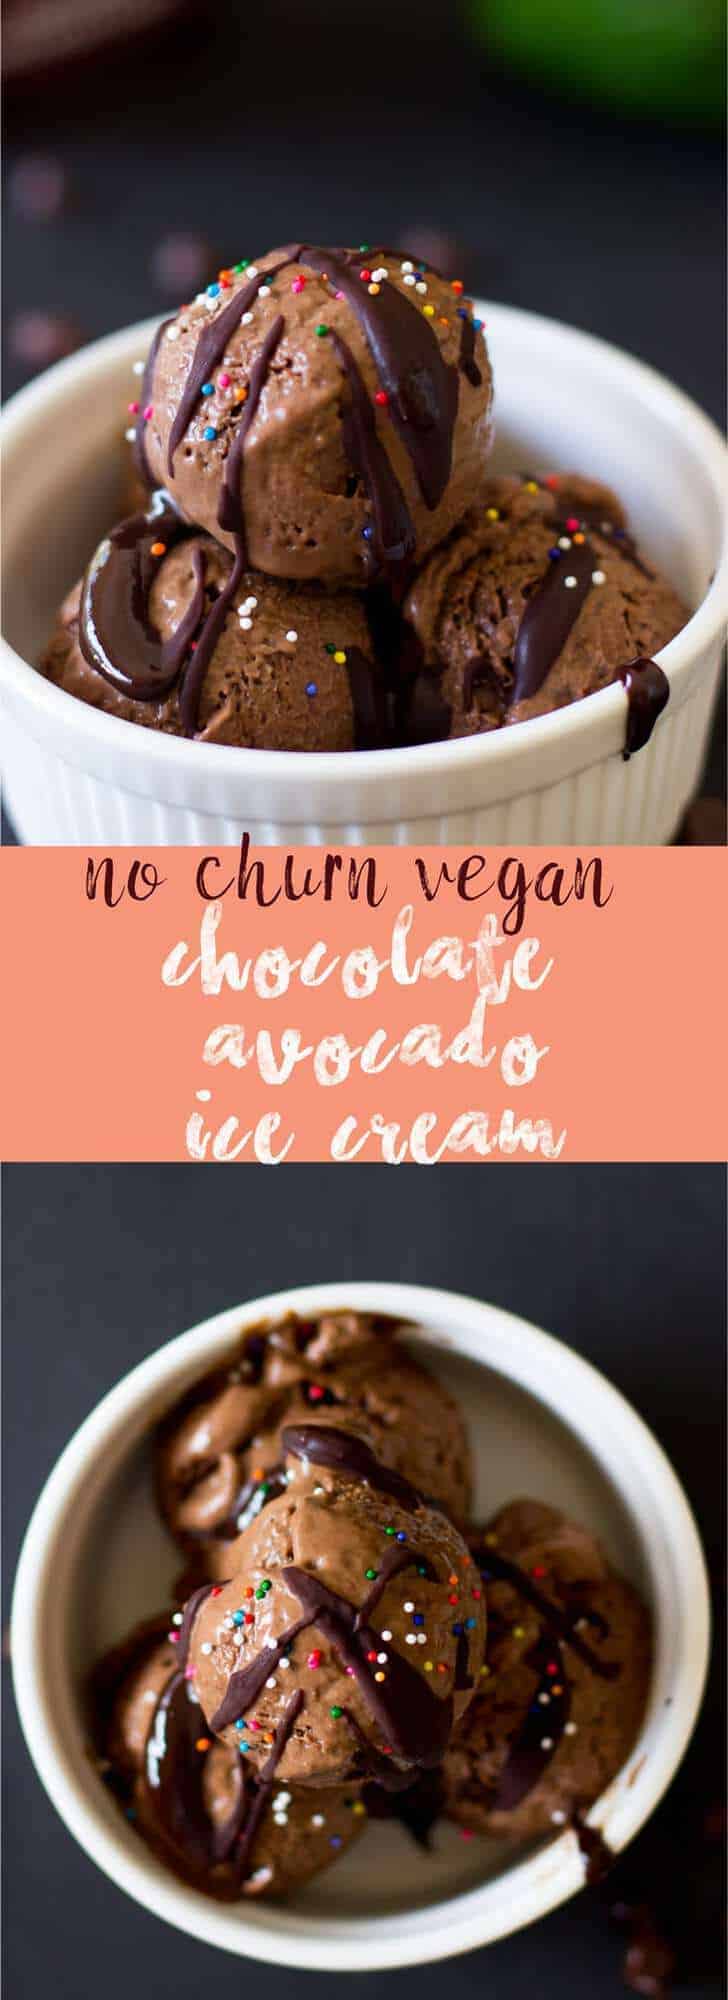 This Vegan Creamy Chocolate-Avocado Ice Cream is not only super chocolatey, no churn, and delicious, but is healthy for you! via https://jessicainthekitchen.com